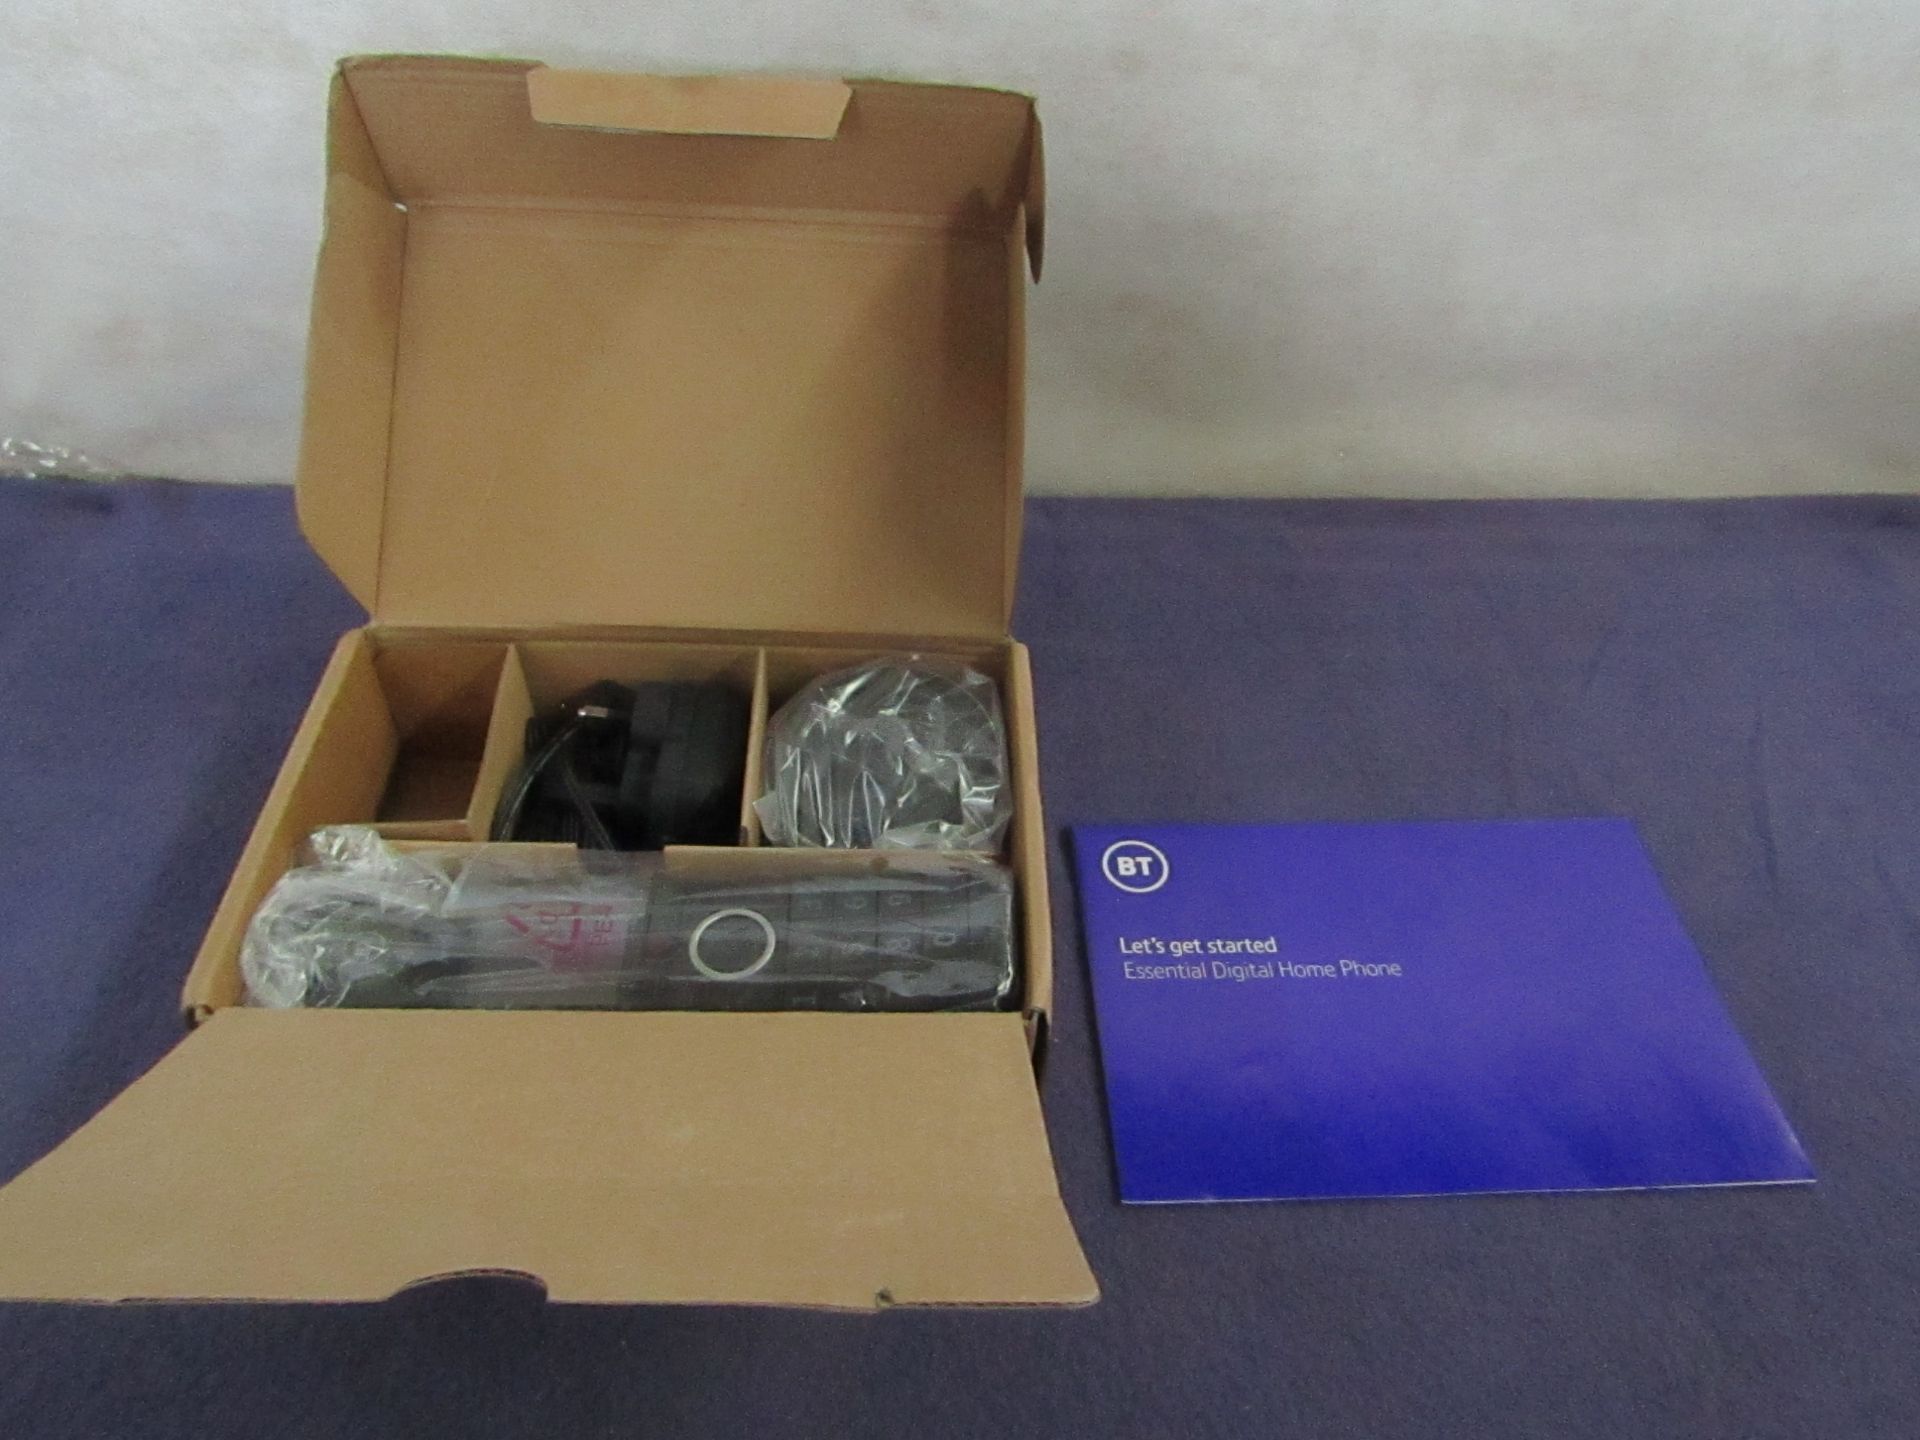 BT - Advanced Digital Home Phone With HD Calling - Good Condition & Boxed.